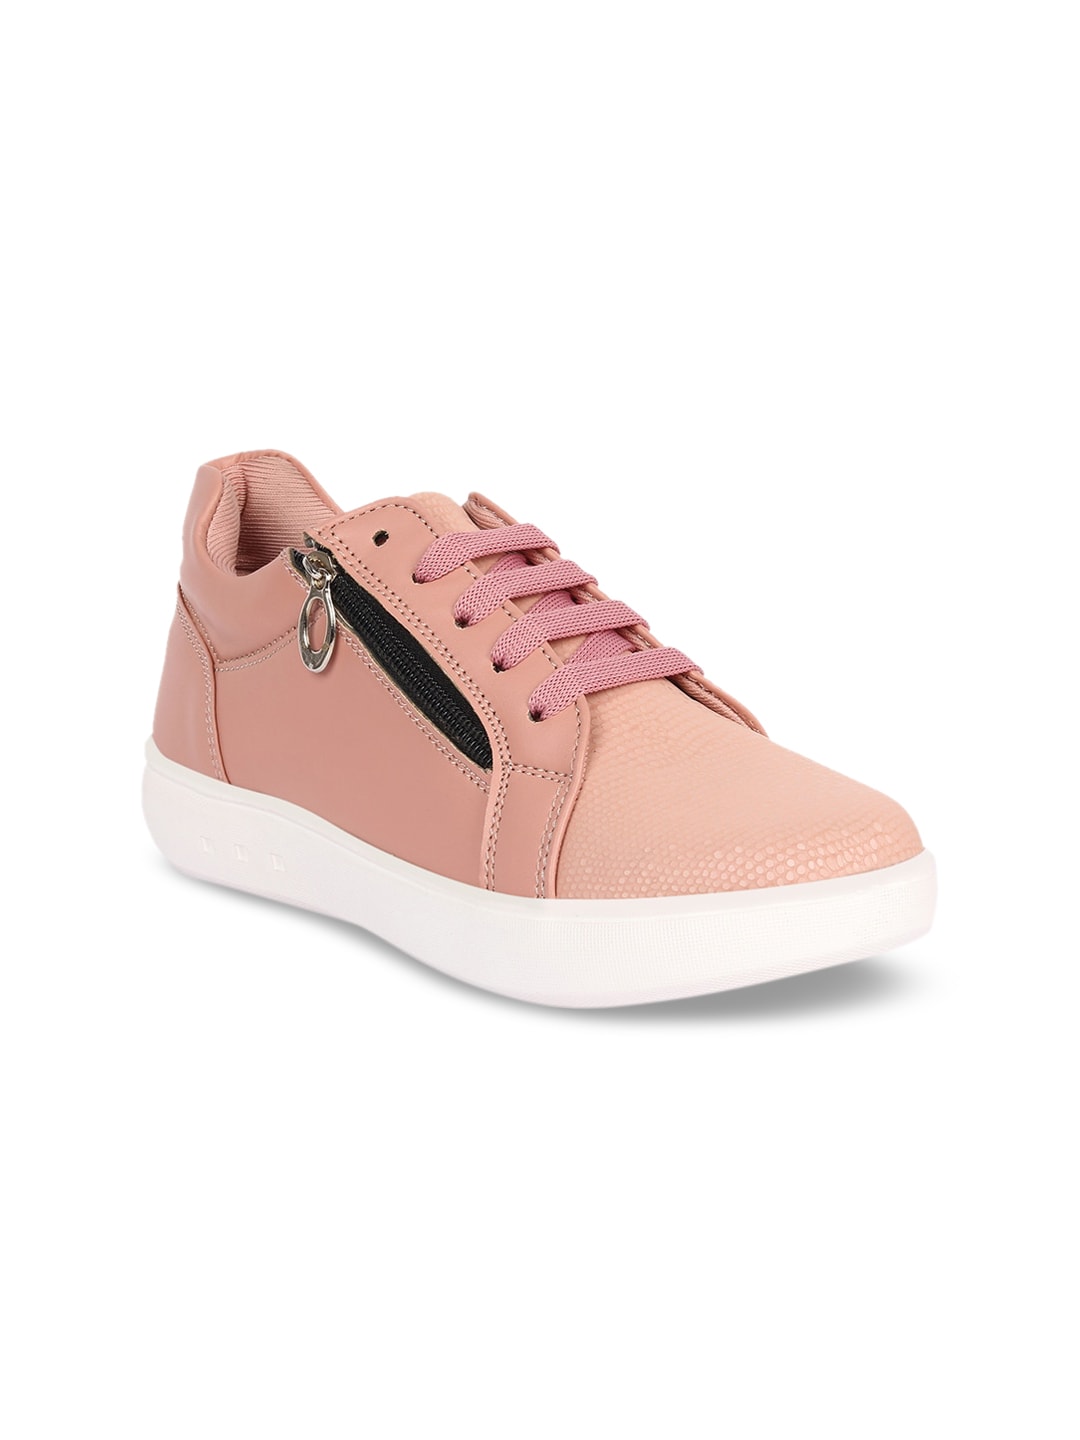 ZAPATOZ Women Pink Colourblocked PU Sneakers Casual Shoes Price in India